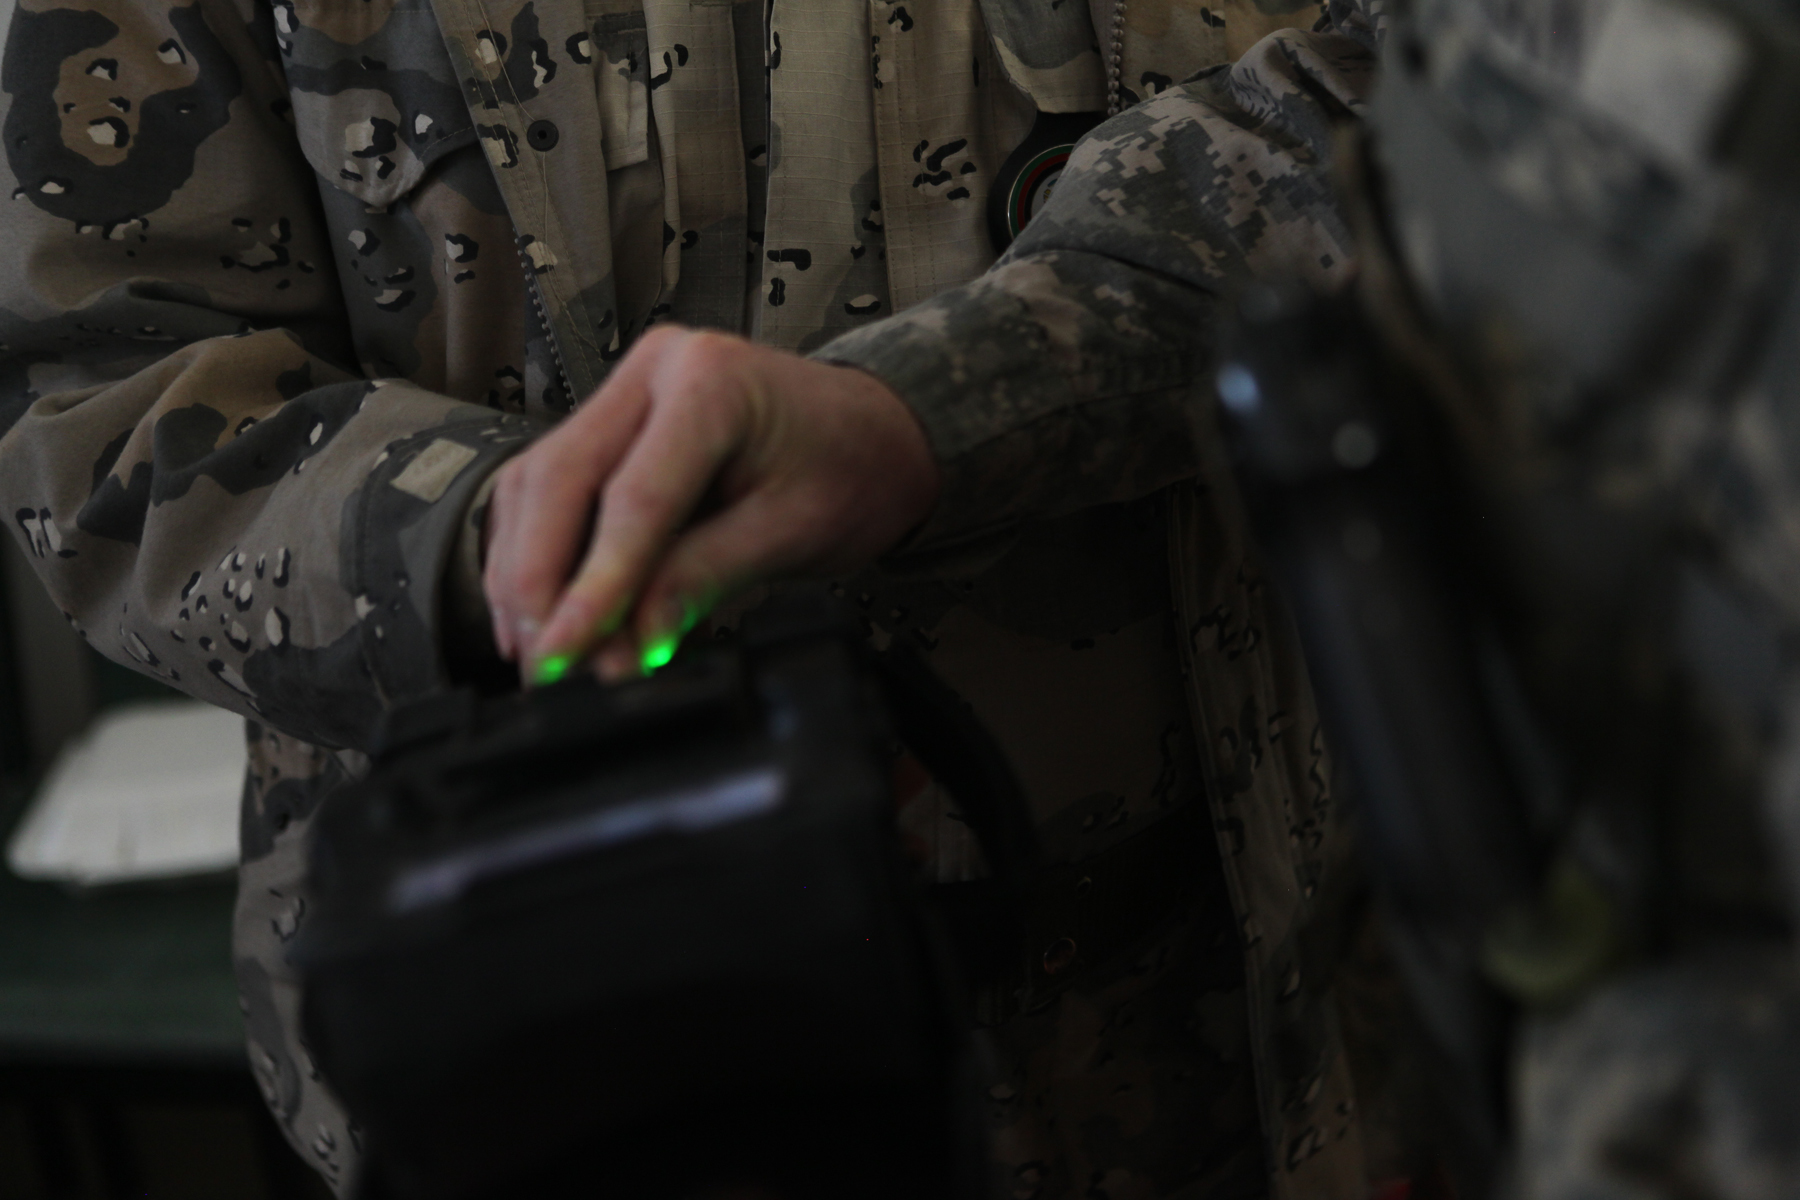 An Army soldier demonstrates a biometrics device during Vice Adm. Robert S. Harward's visit to Zaranj, Afghanistan, Jan 6. The commanding officer of Combined Joint Interagency Task Force 435 toured a provincial prison and the Iran/Afghanistan border crossing.